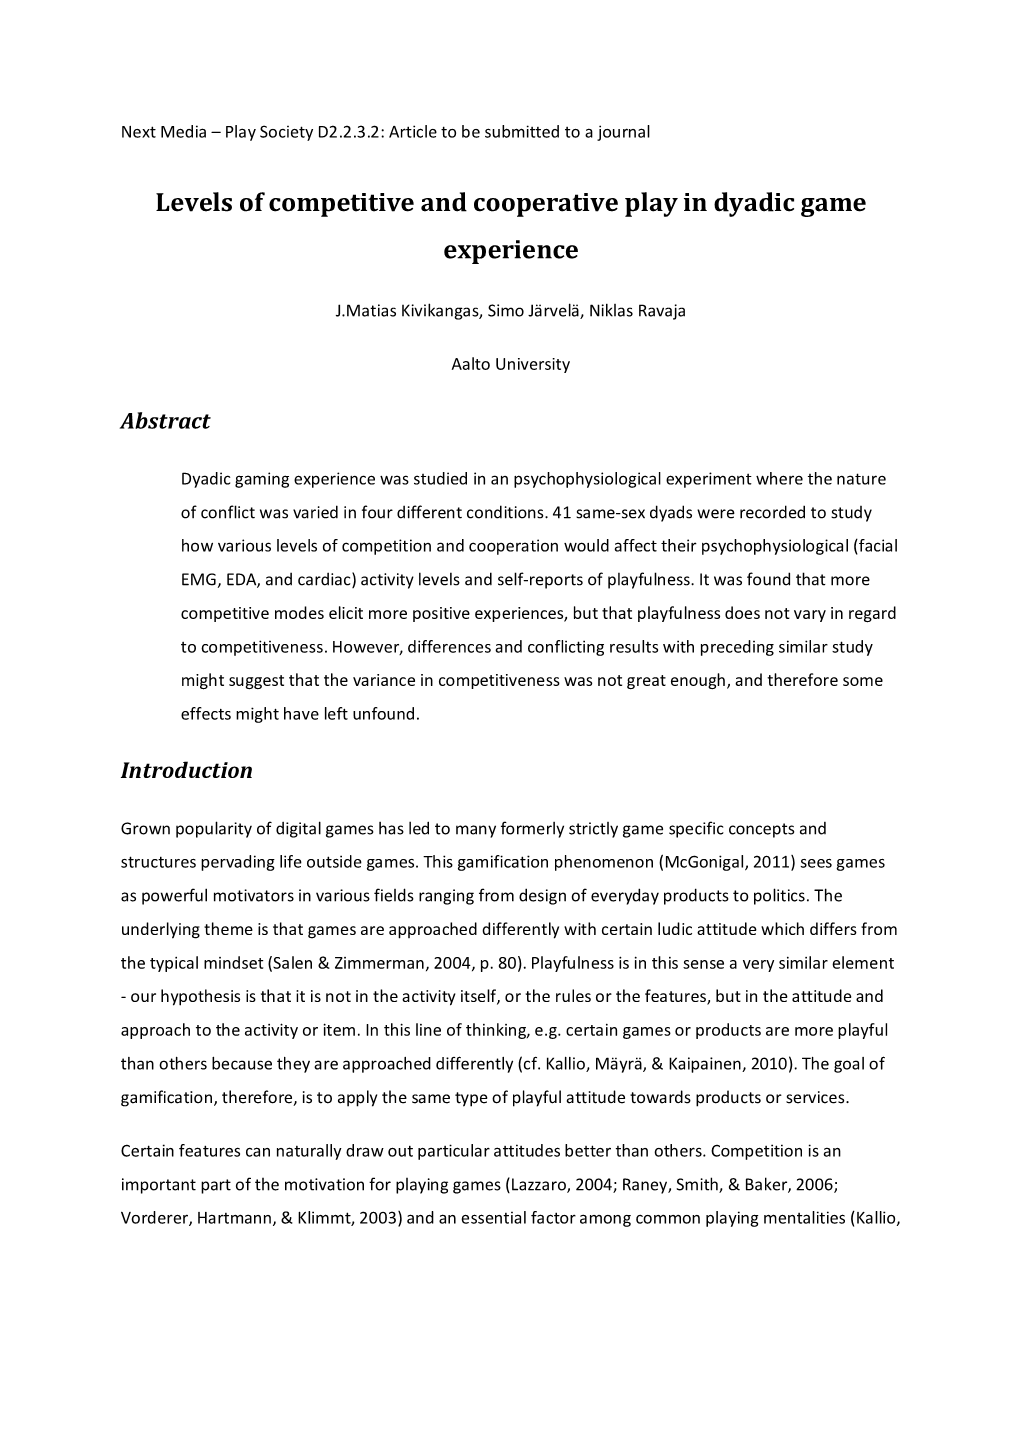 Levels of Competitive and Cooperative Play in Dyadic Game Experience